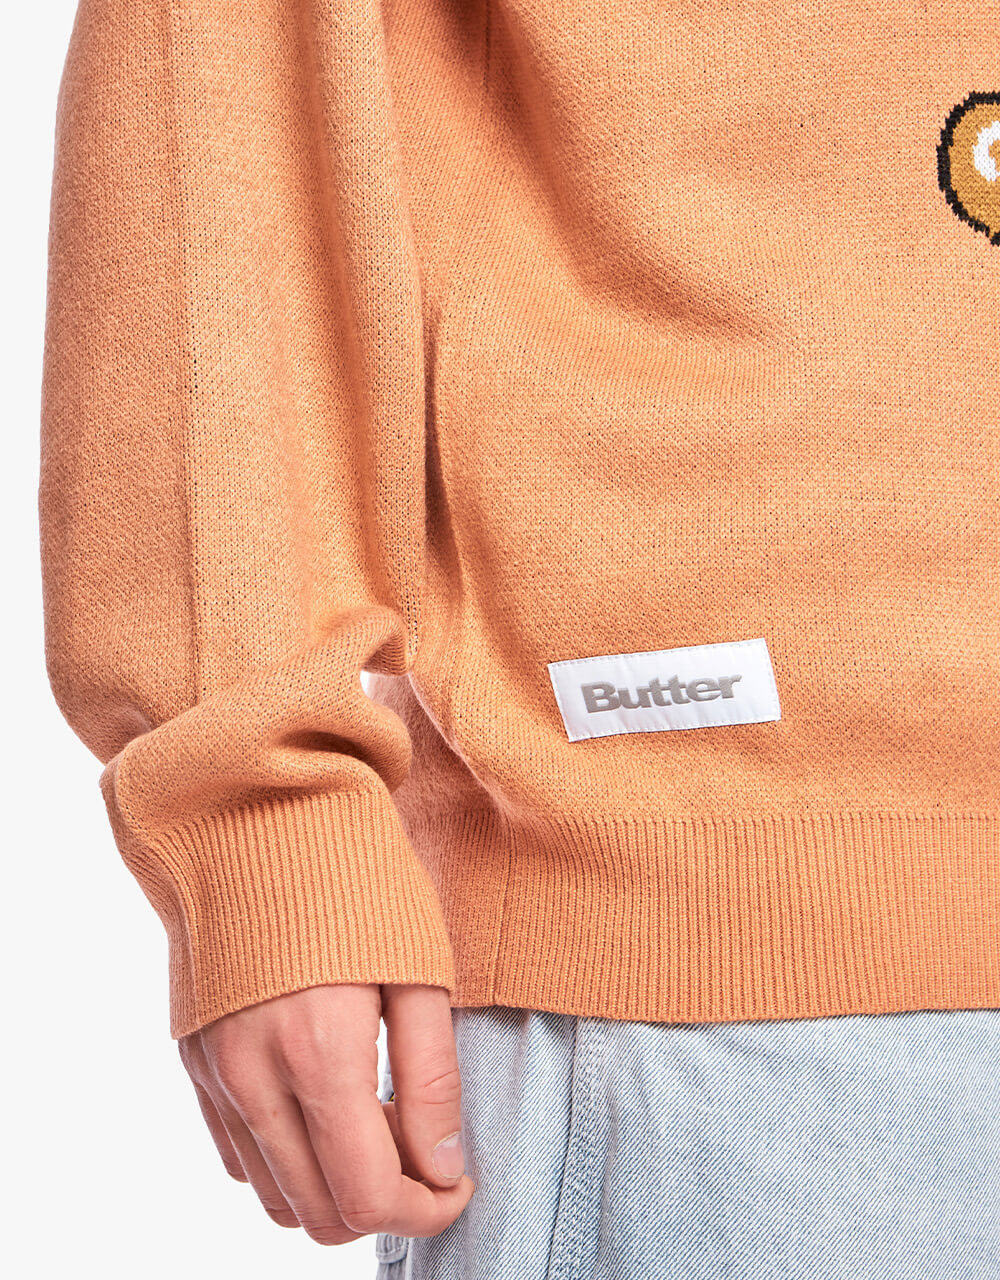 Butter Goods Cymbals Knit Sweater - Washed Peach